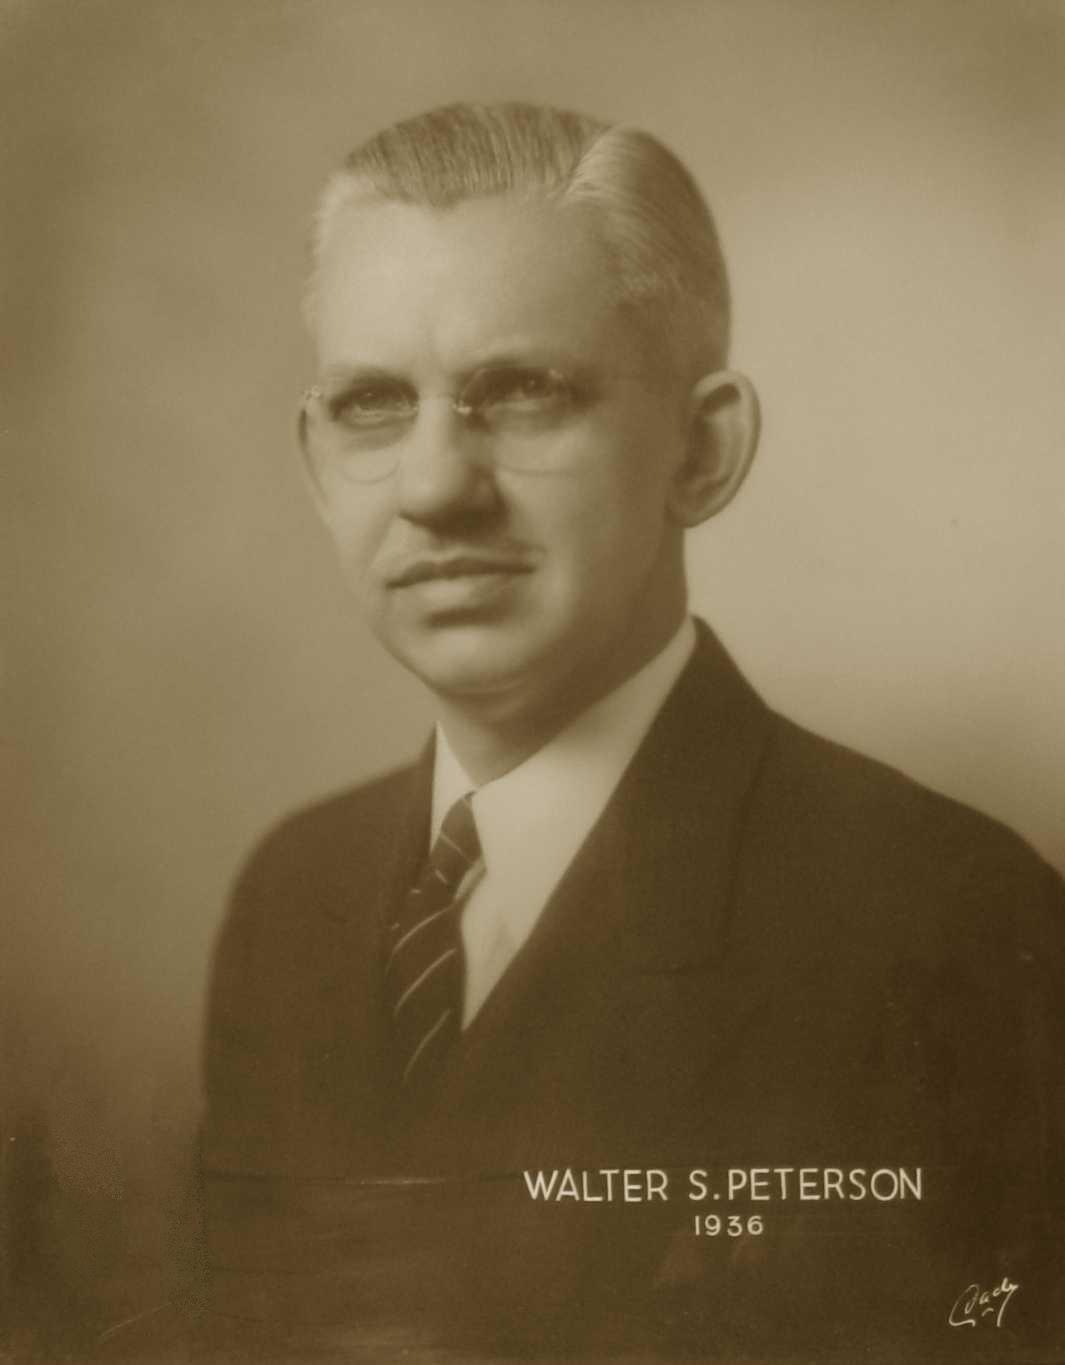 Walter S. Peterson, 1936